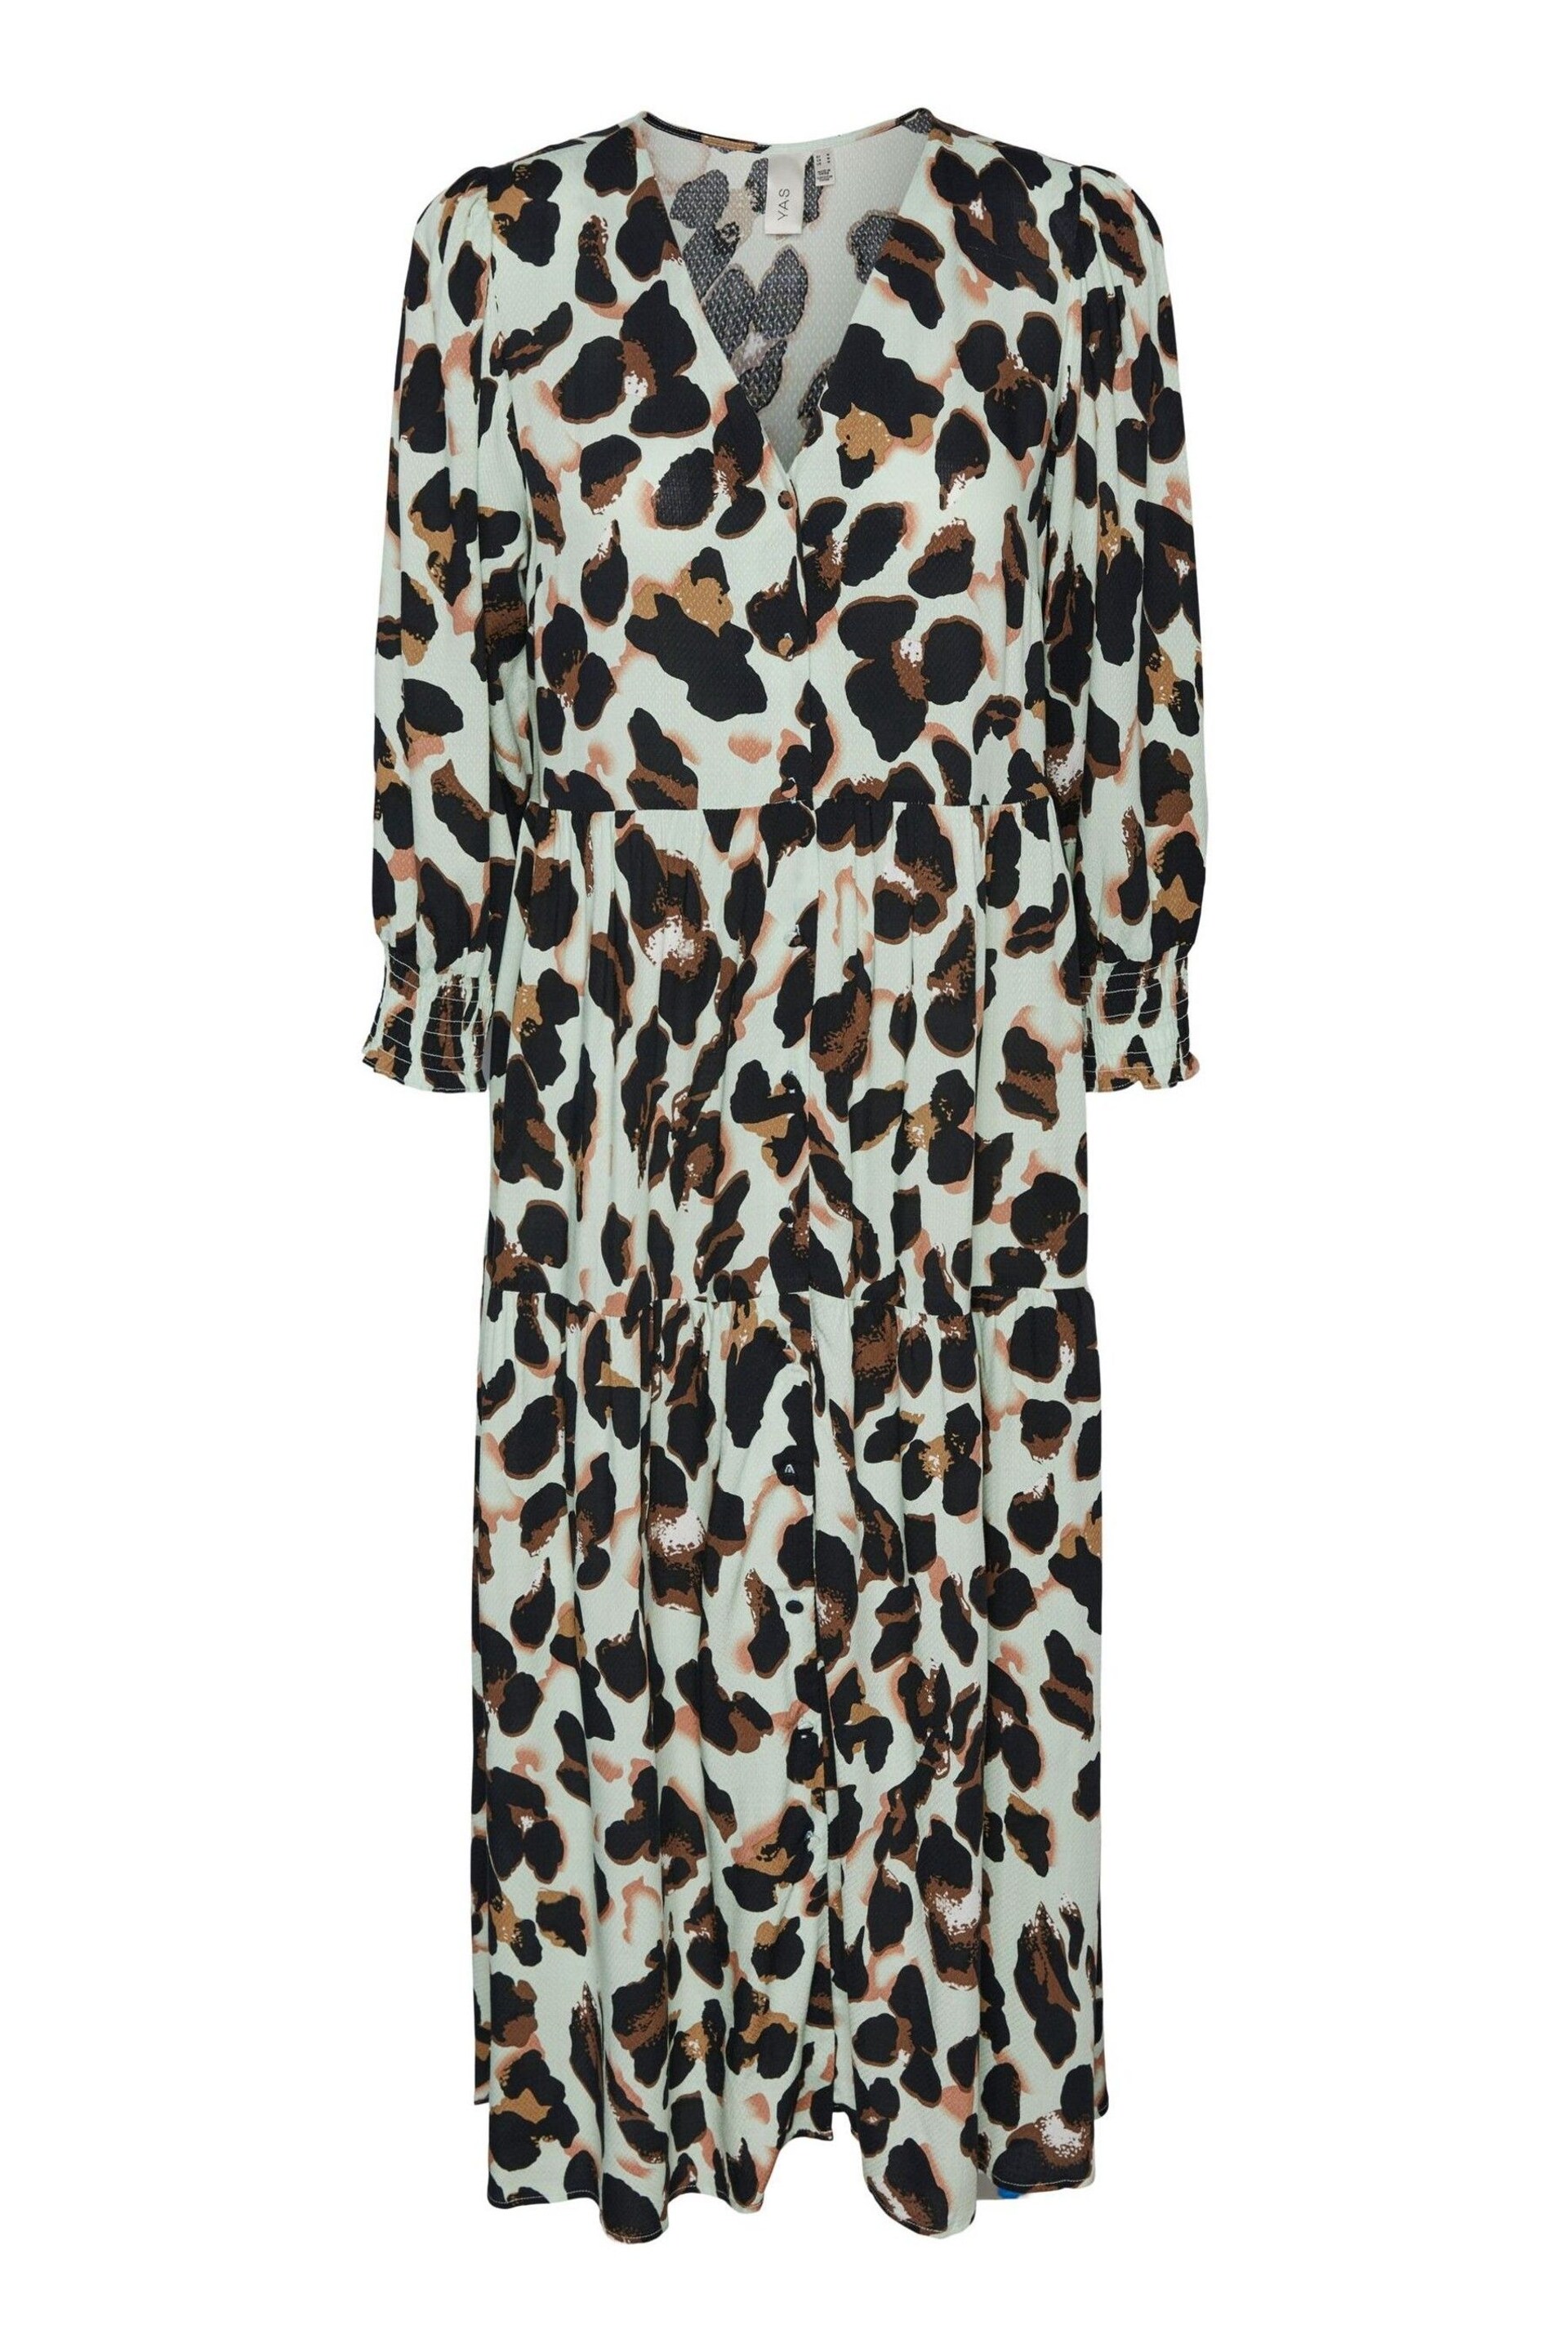 Y.A.S Leopard Print Button Through Midi Printed Dress - Image 5 of 5